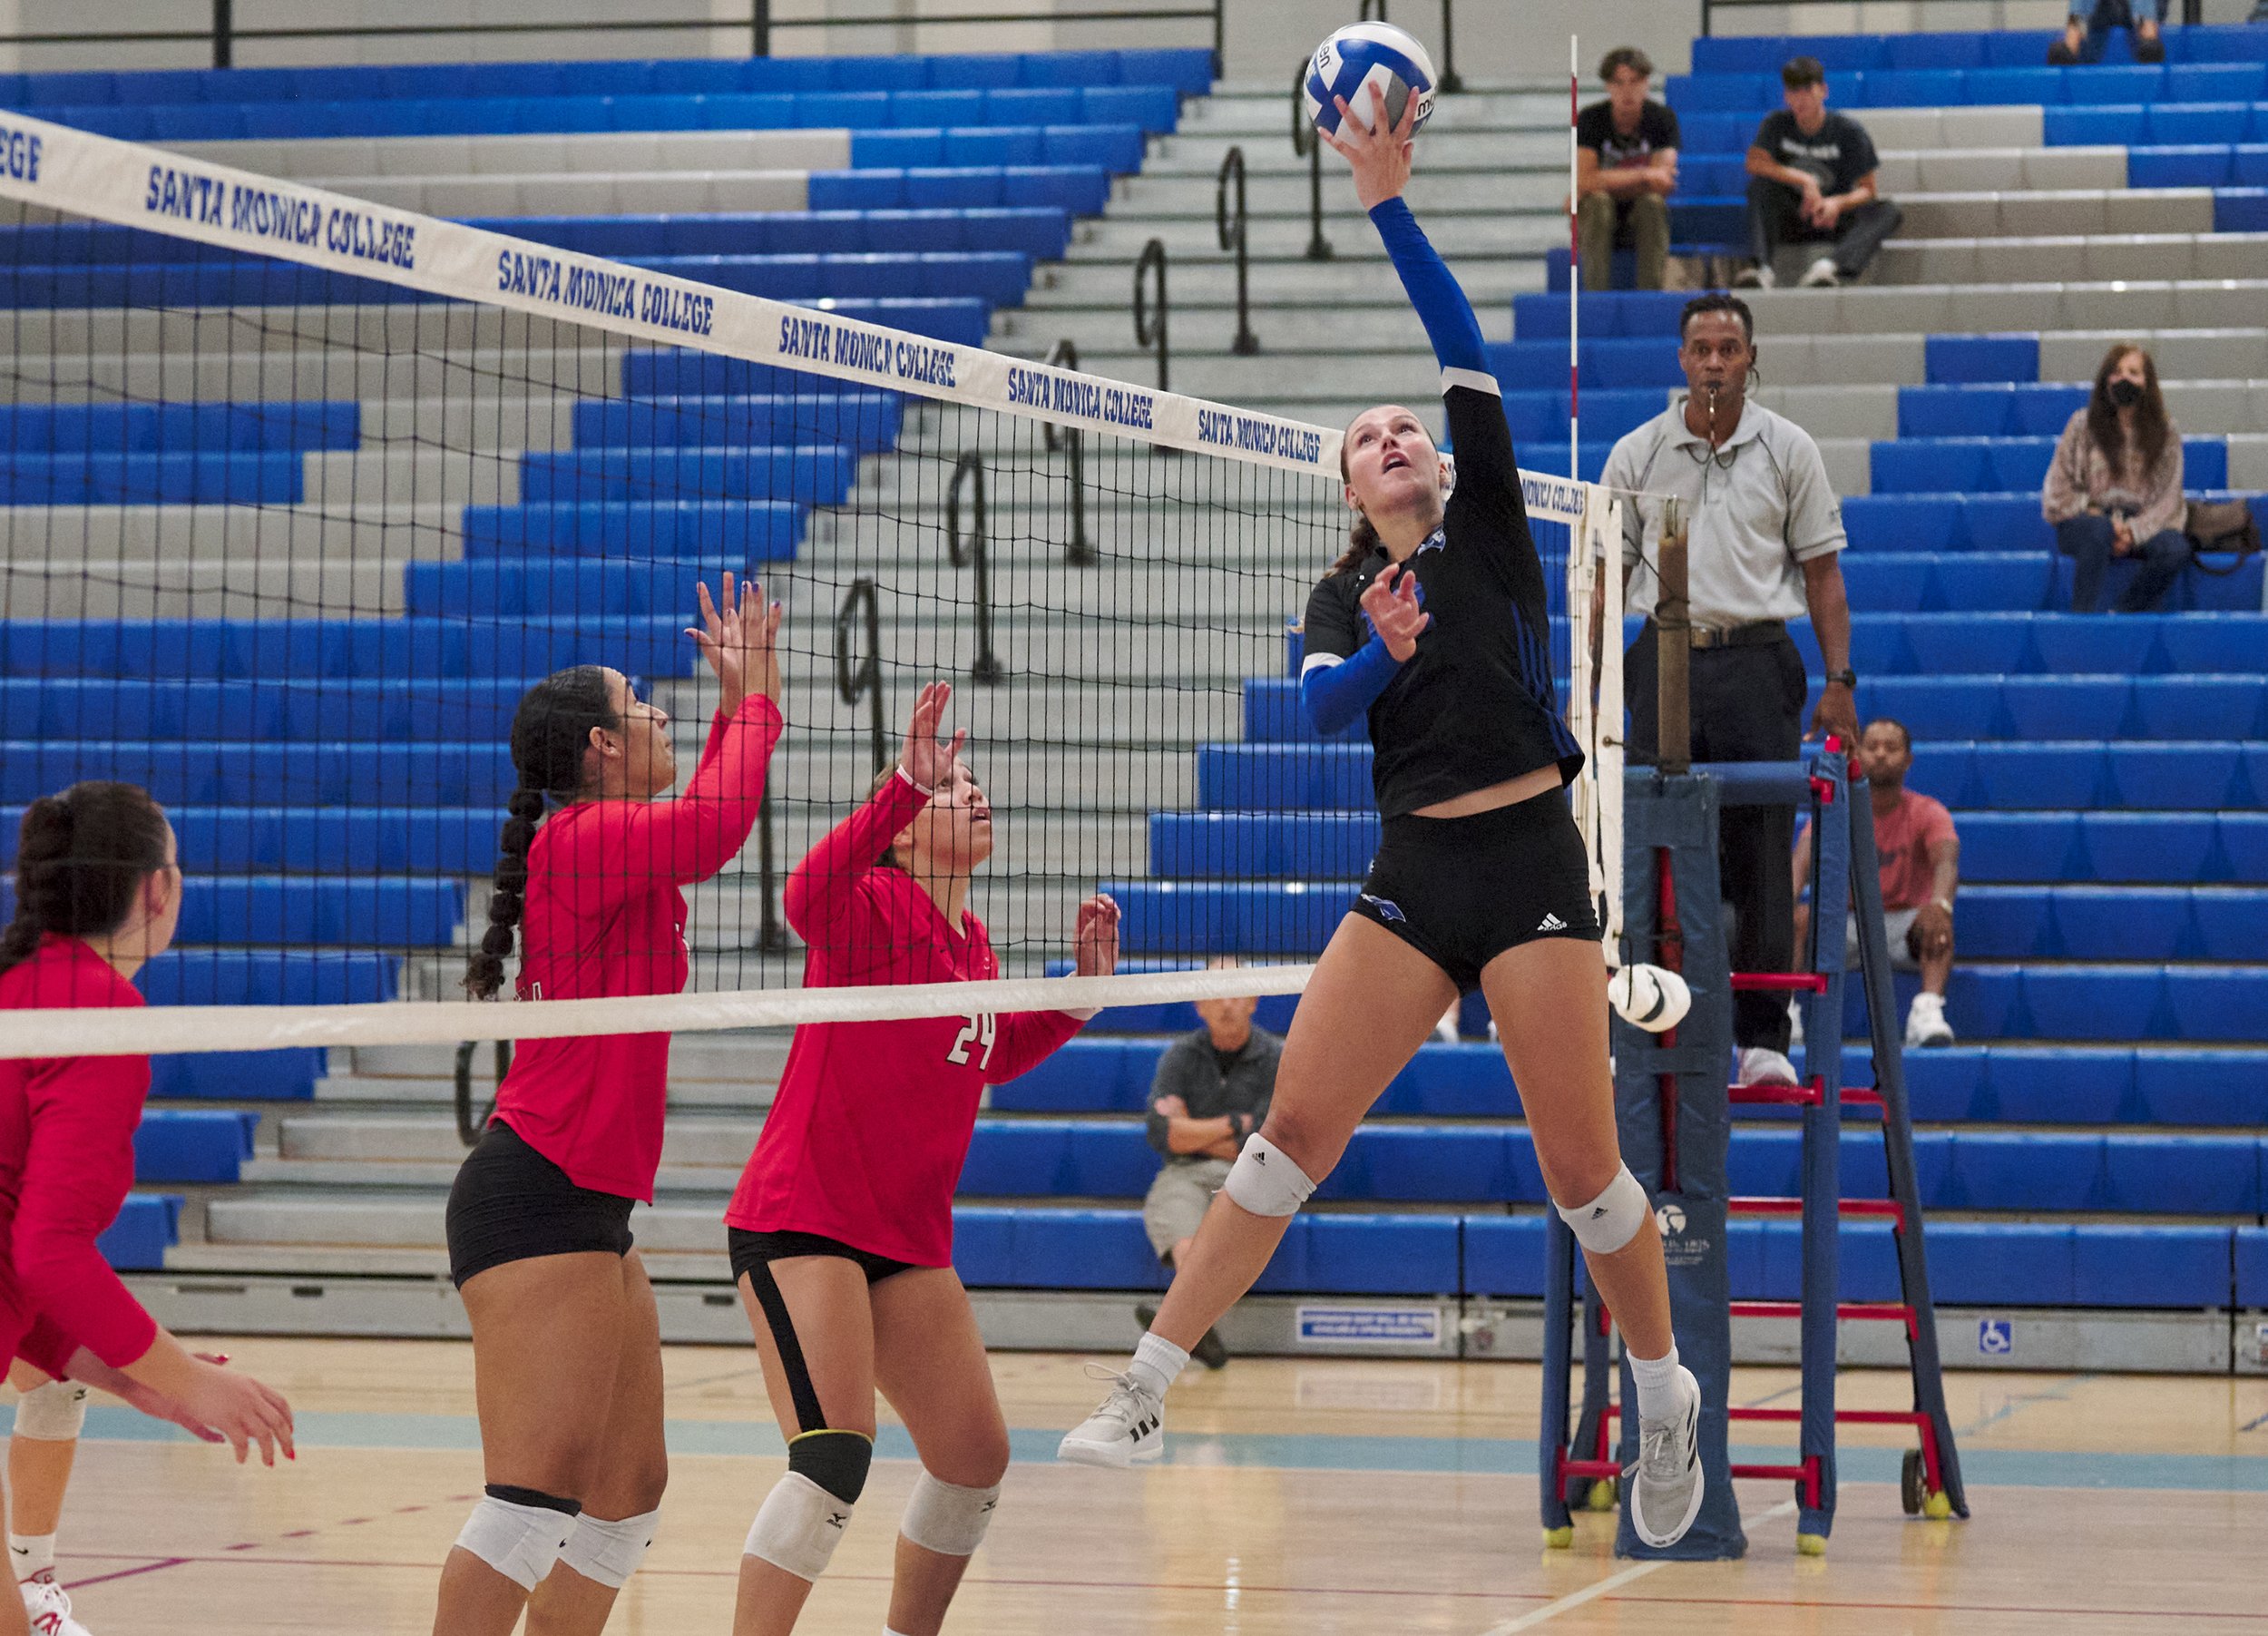  Santa Monica College Corsairs' Mia Paulson (right) and Bakersfield College Renegades' Tia Jules and Kami Marion during the women's volleyball match on Wednesday, Sept. 28, 2022, at the Corsair Gym in Santa Monica, Calif. The Corsairs won 3-2. (Nicho